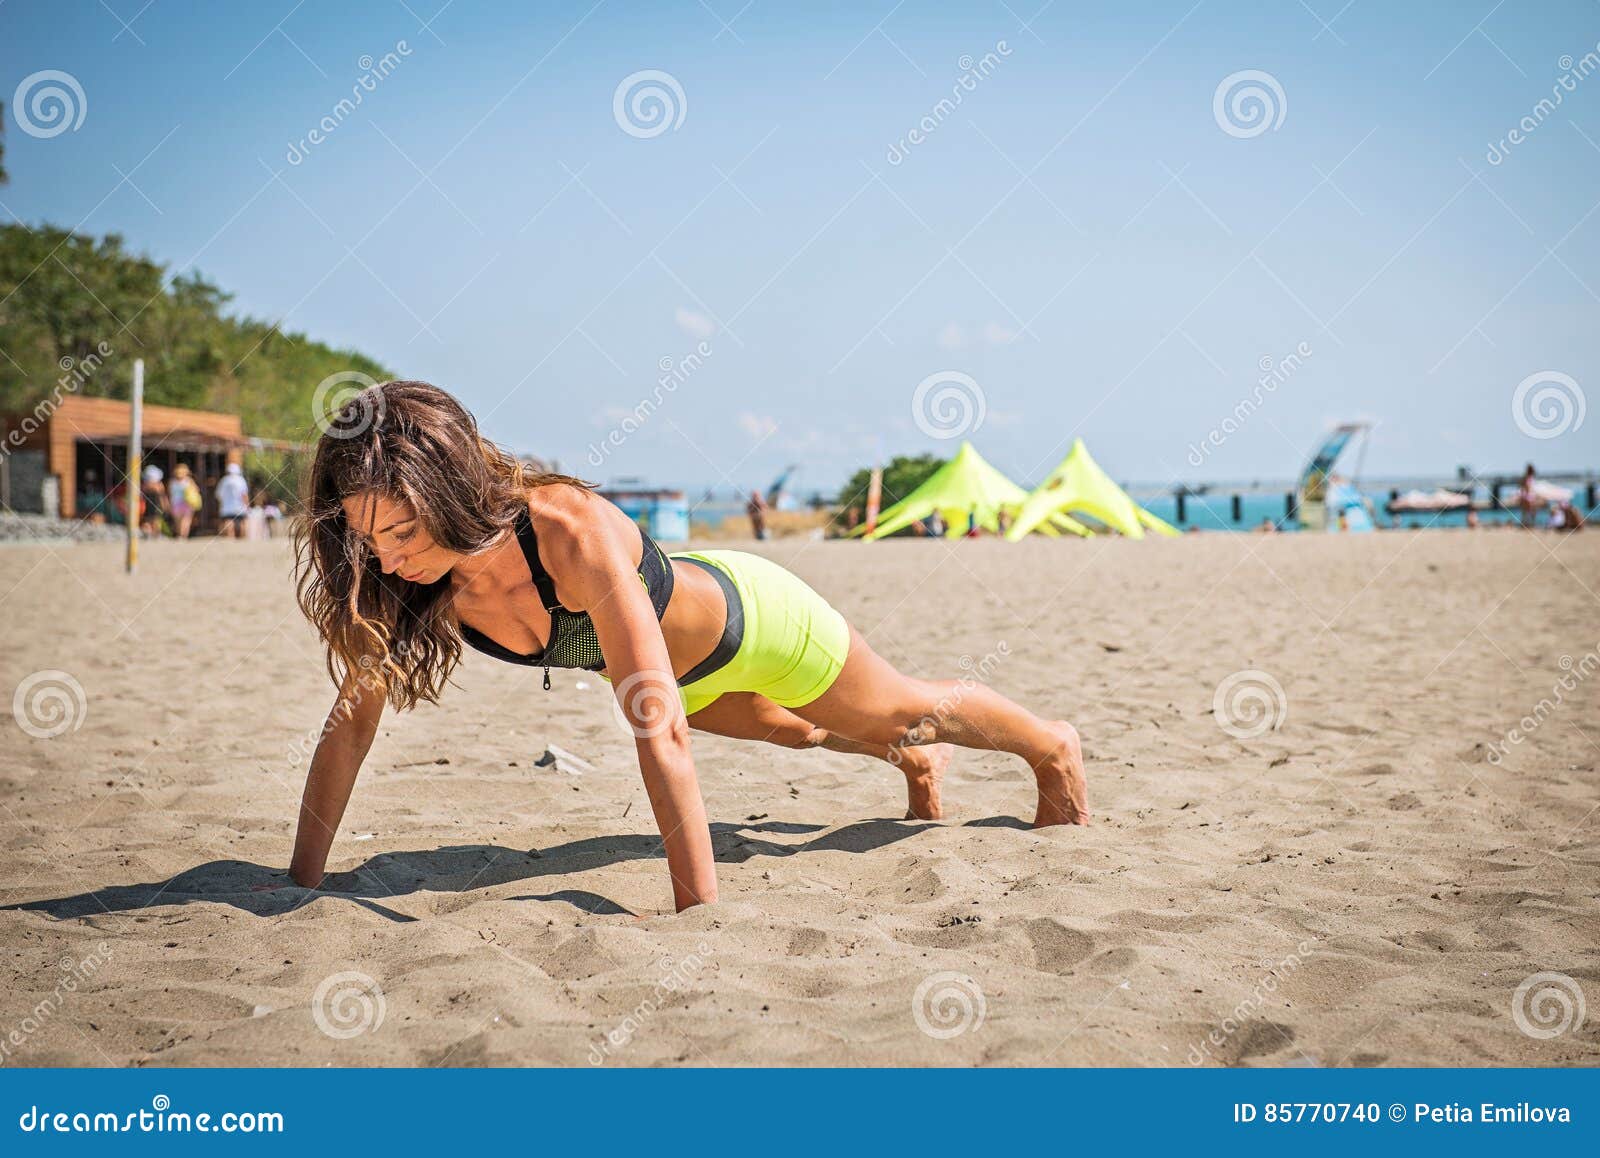 Push-ups fitness woman doing pushups outside on beach. Fit female sport model girl training crossfit outdoors.